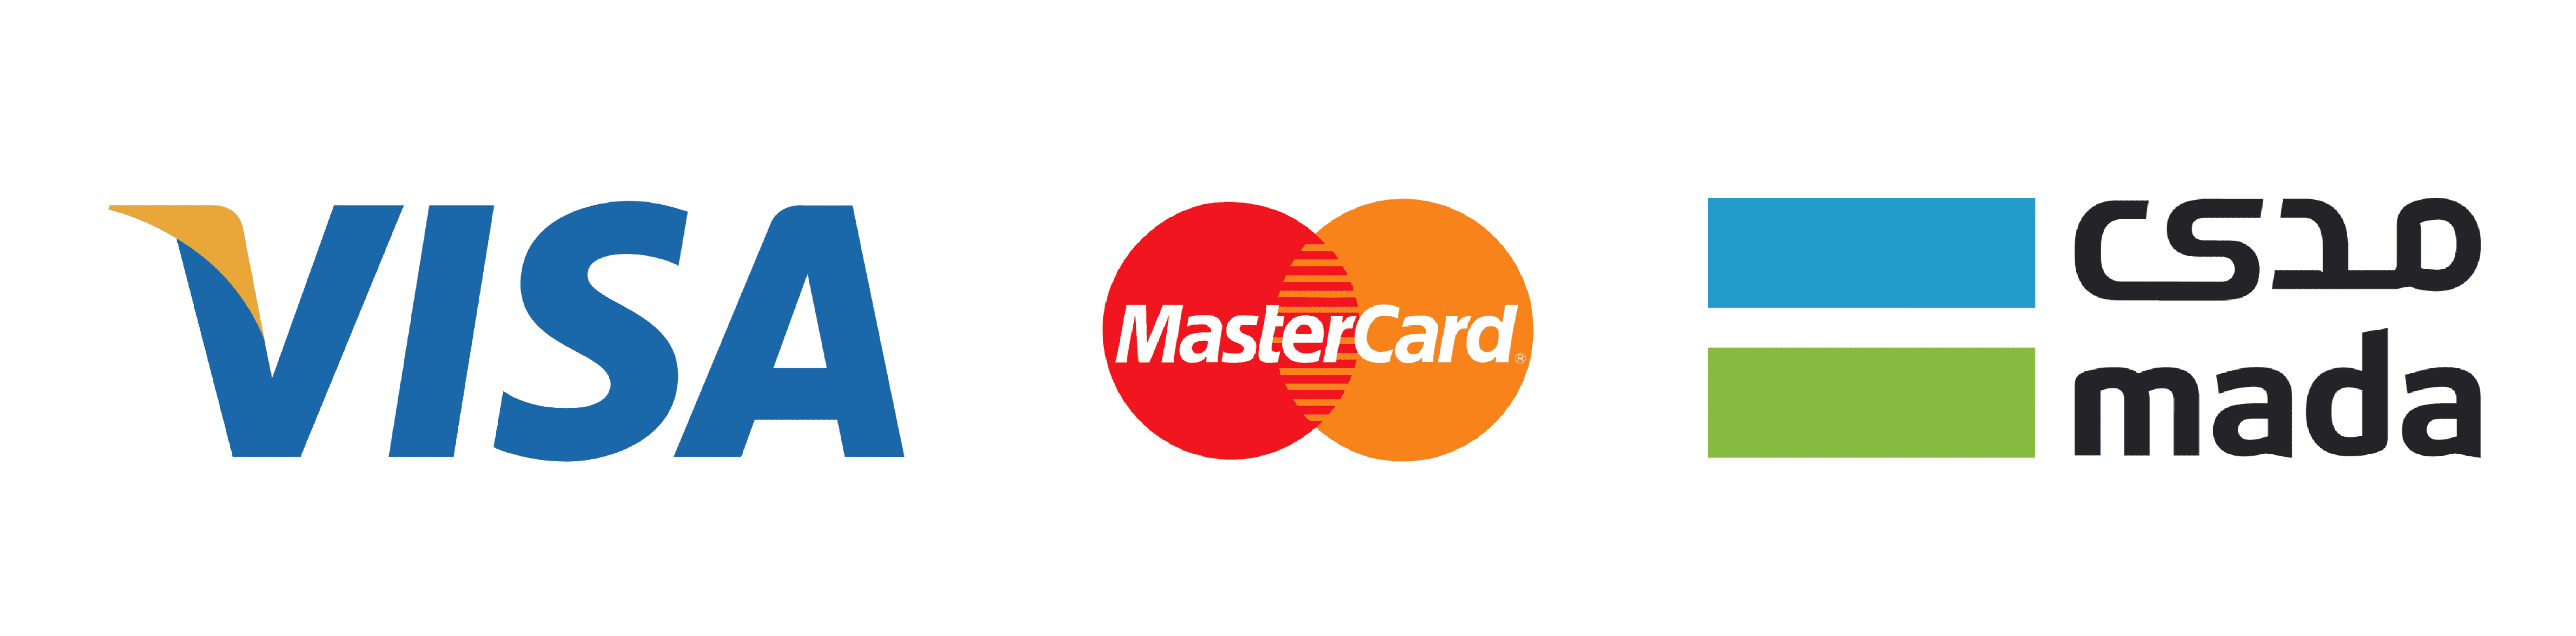 Accepted credit cards